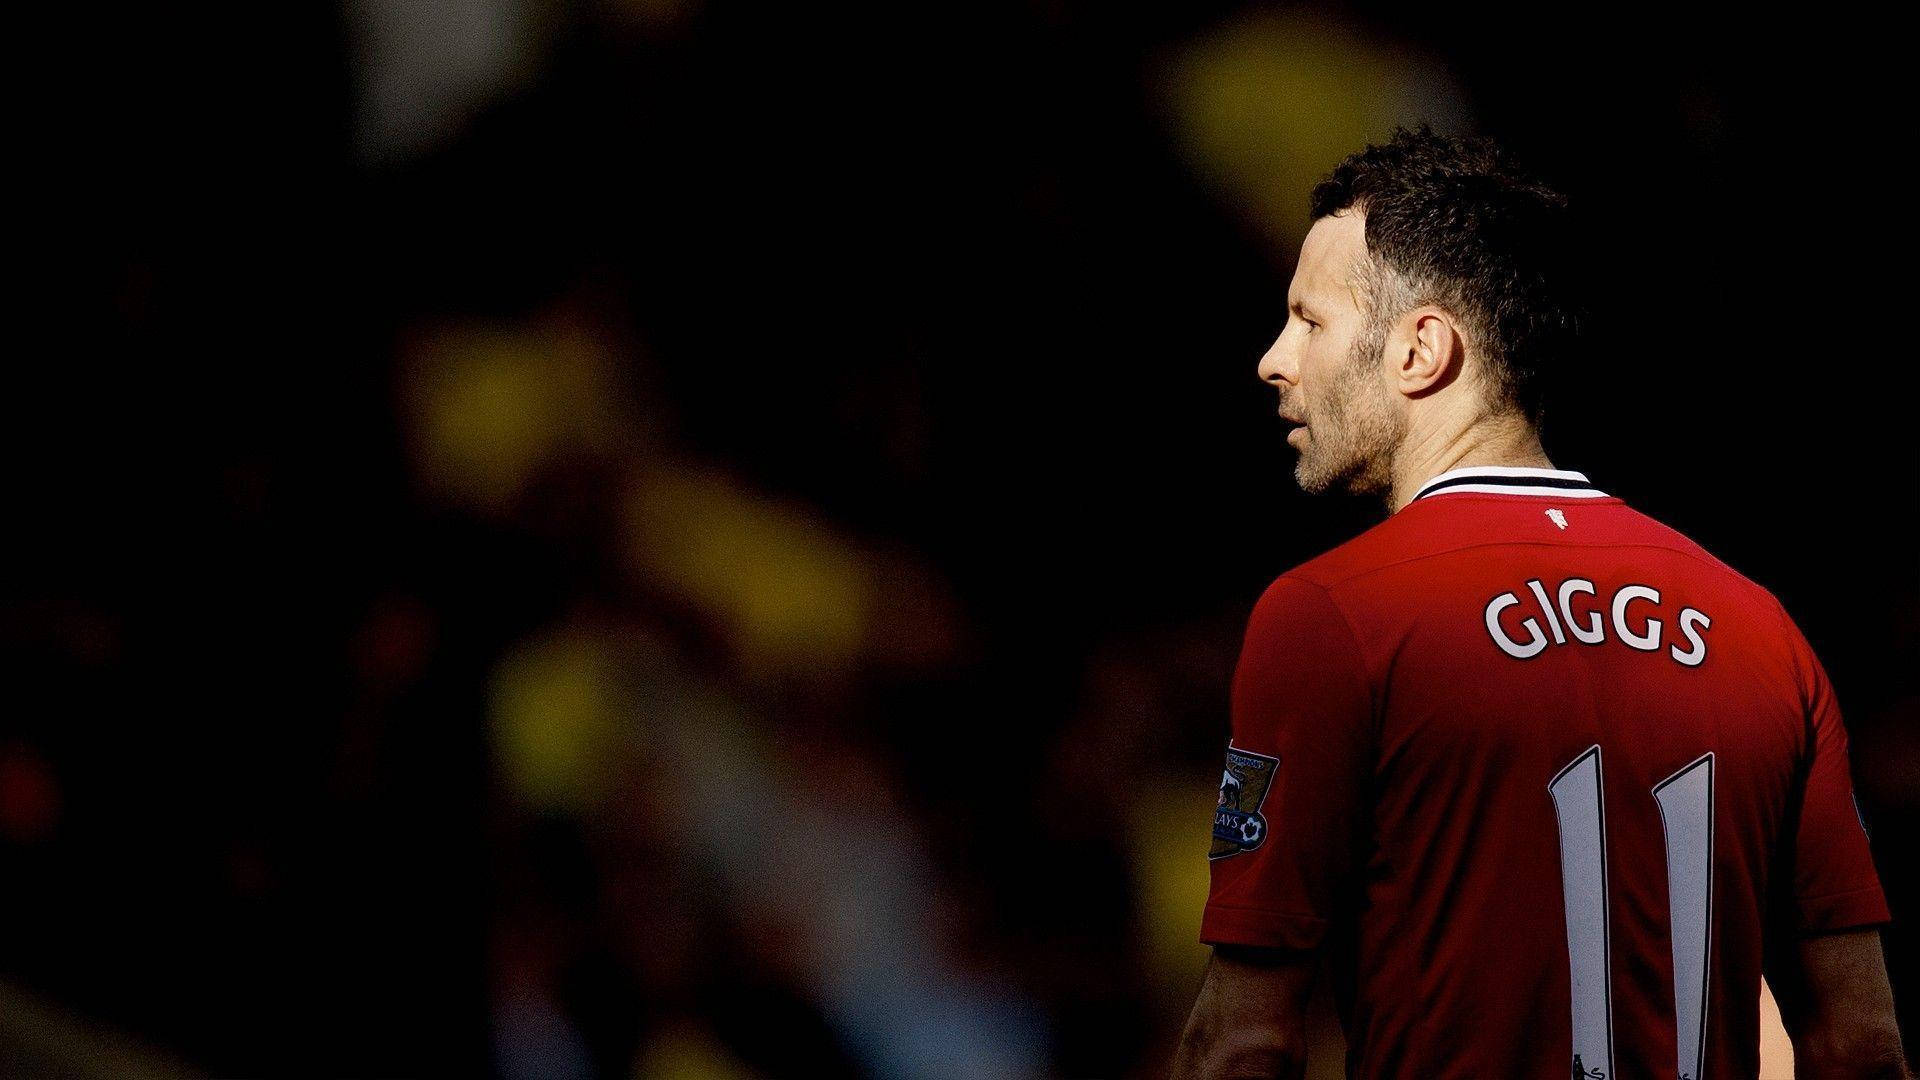 Ryan Giggs Red Jersey 11 Background